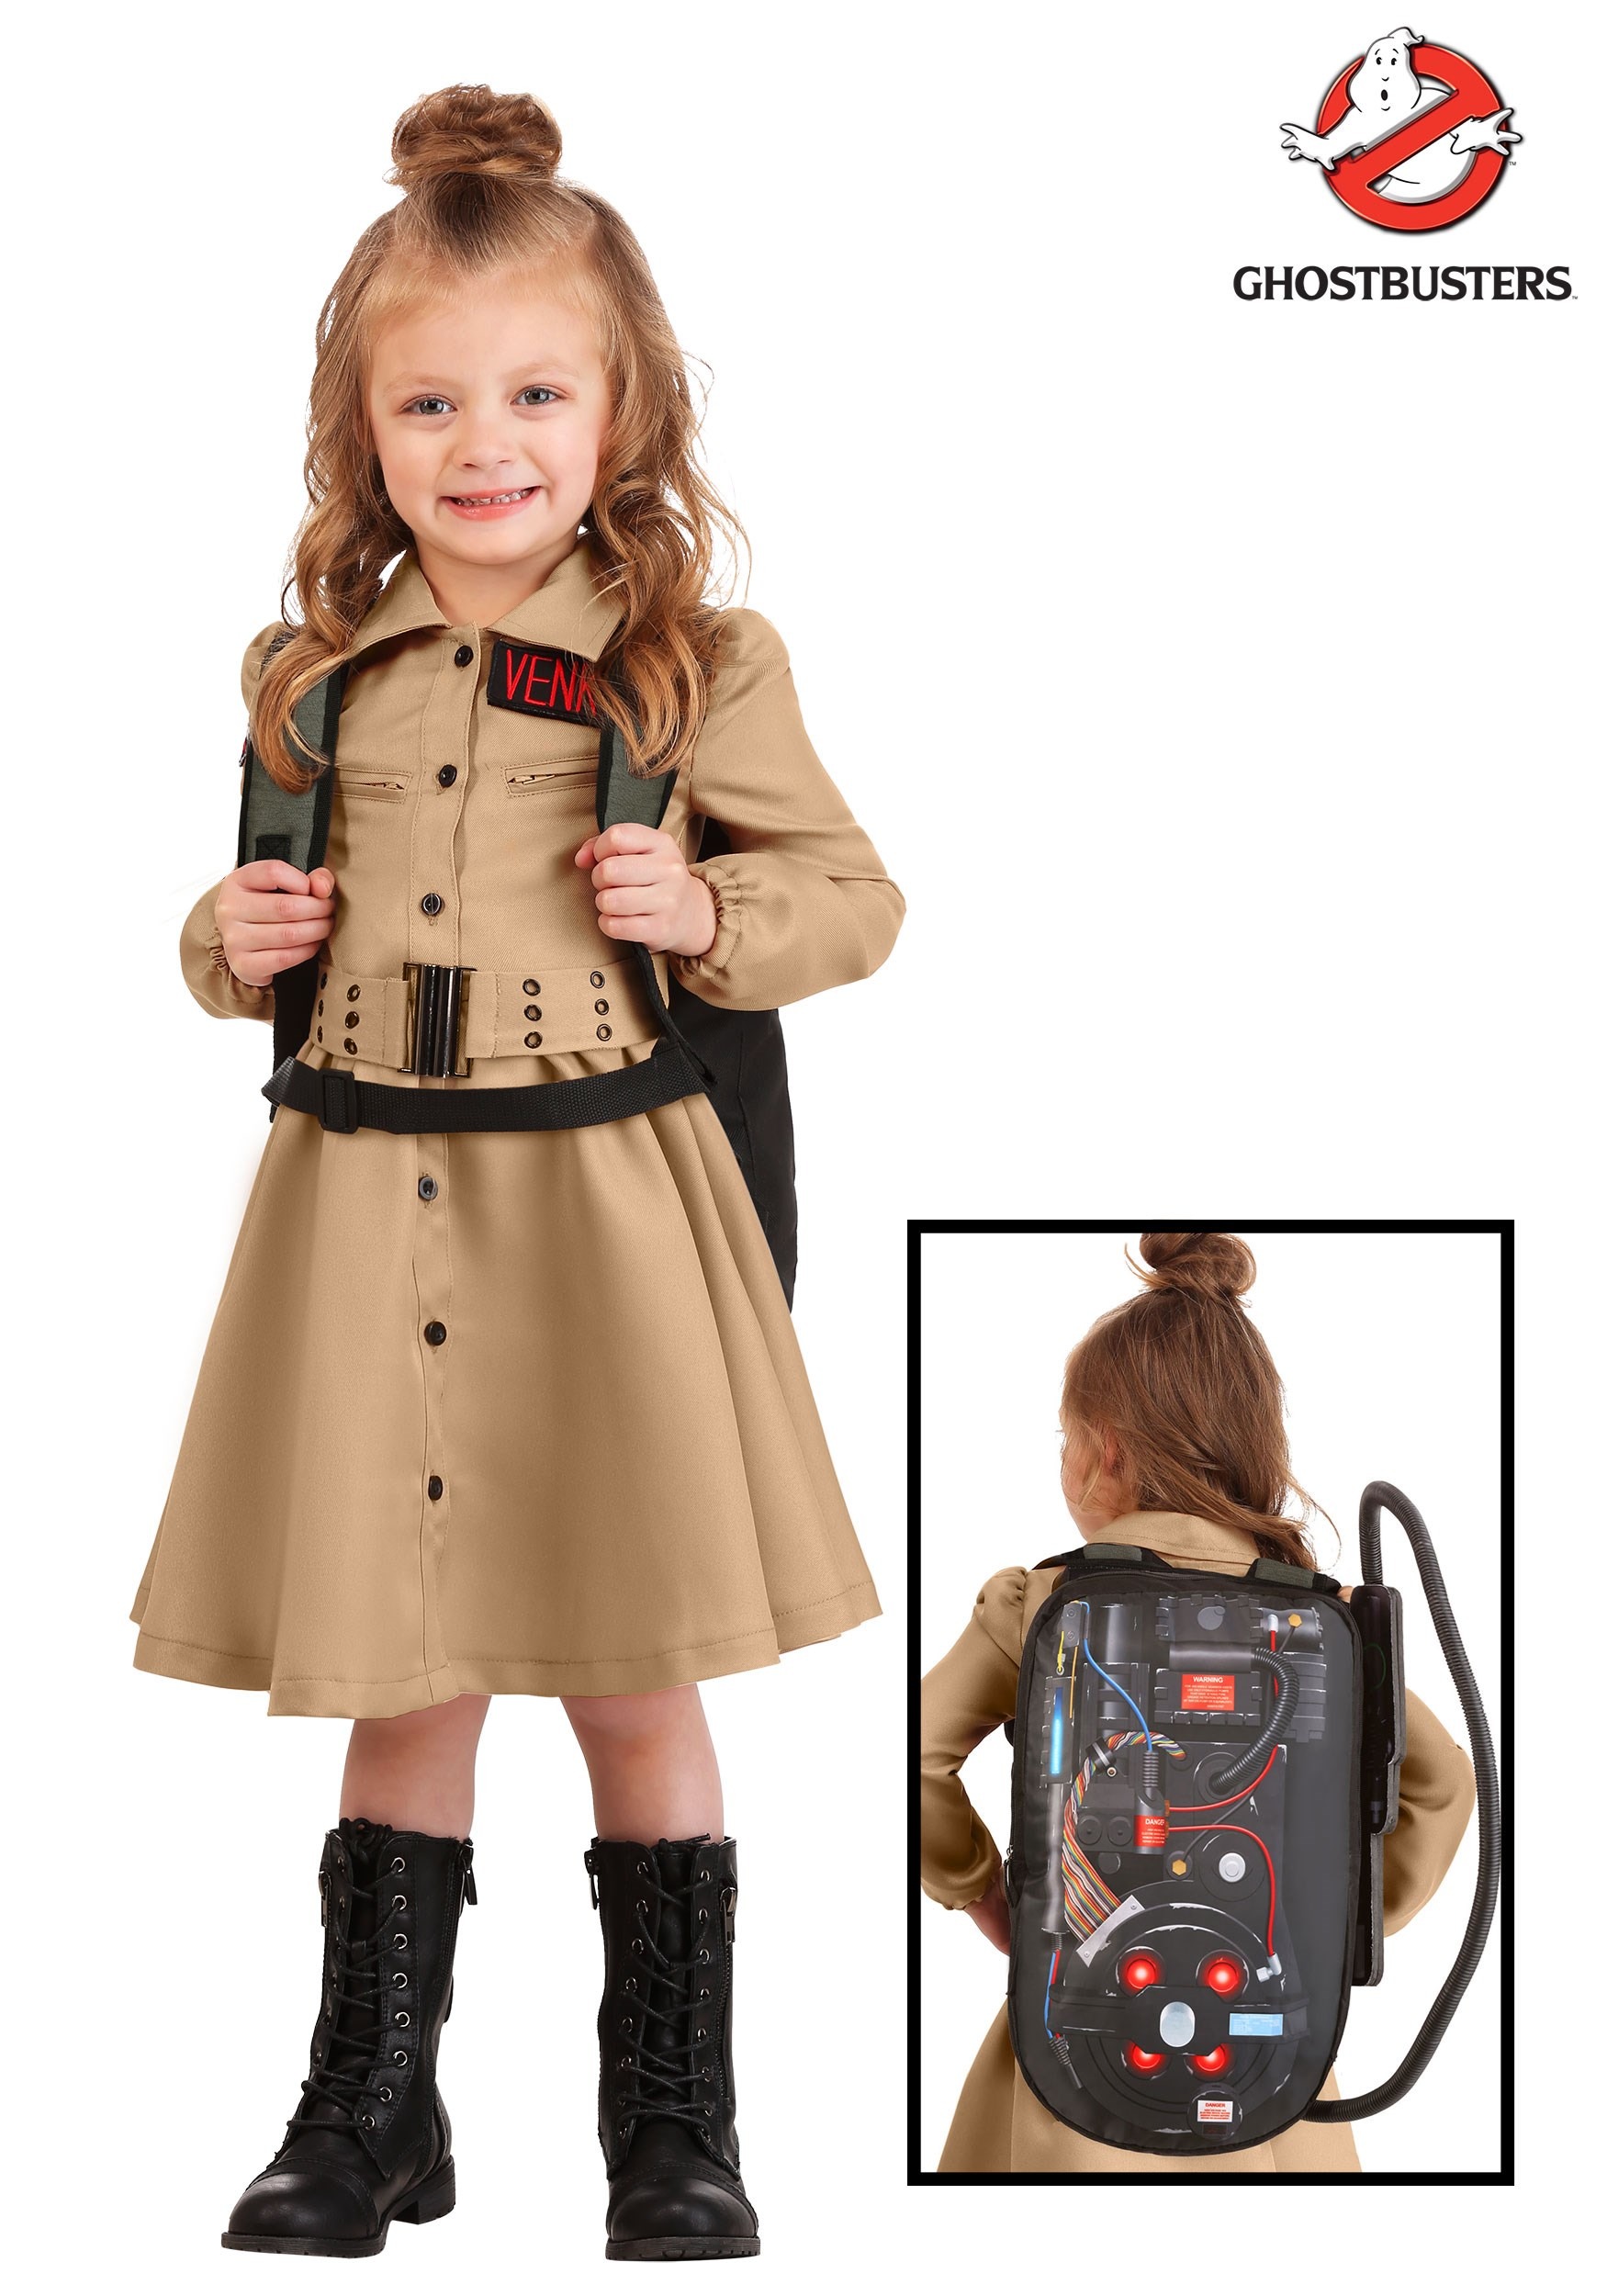 Ghostbusters Girls Costume Dress for Toddlers